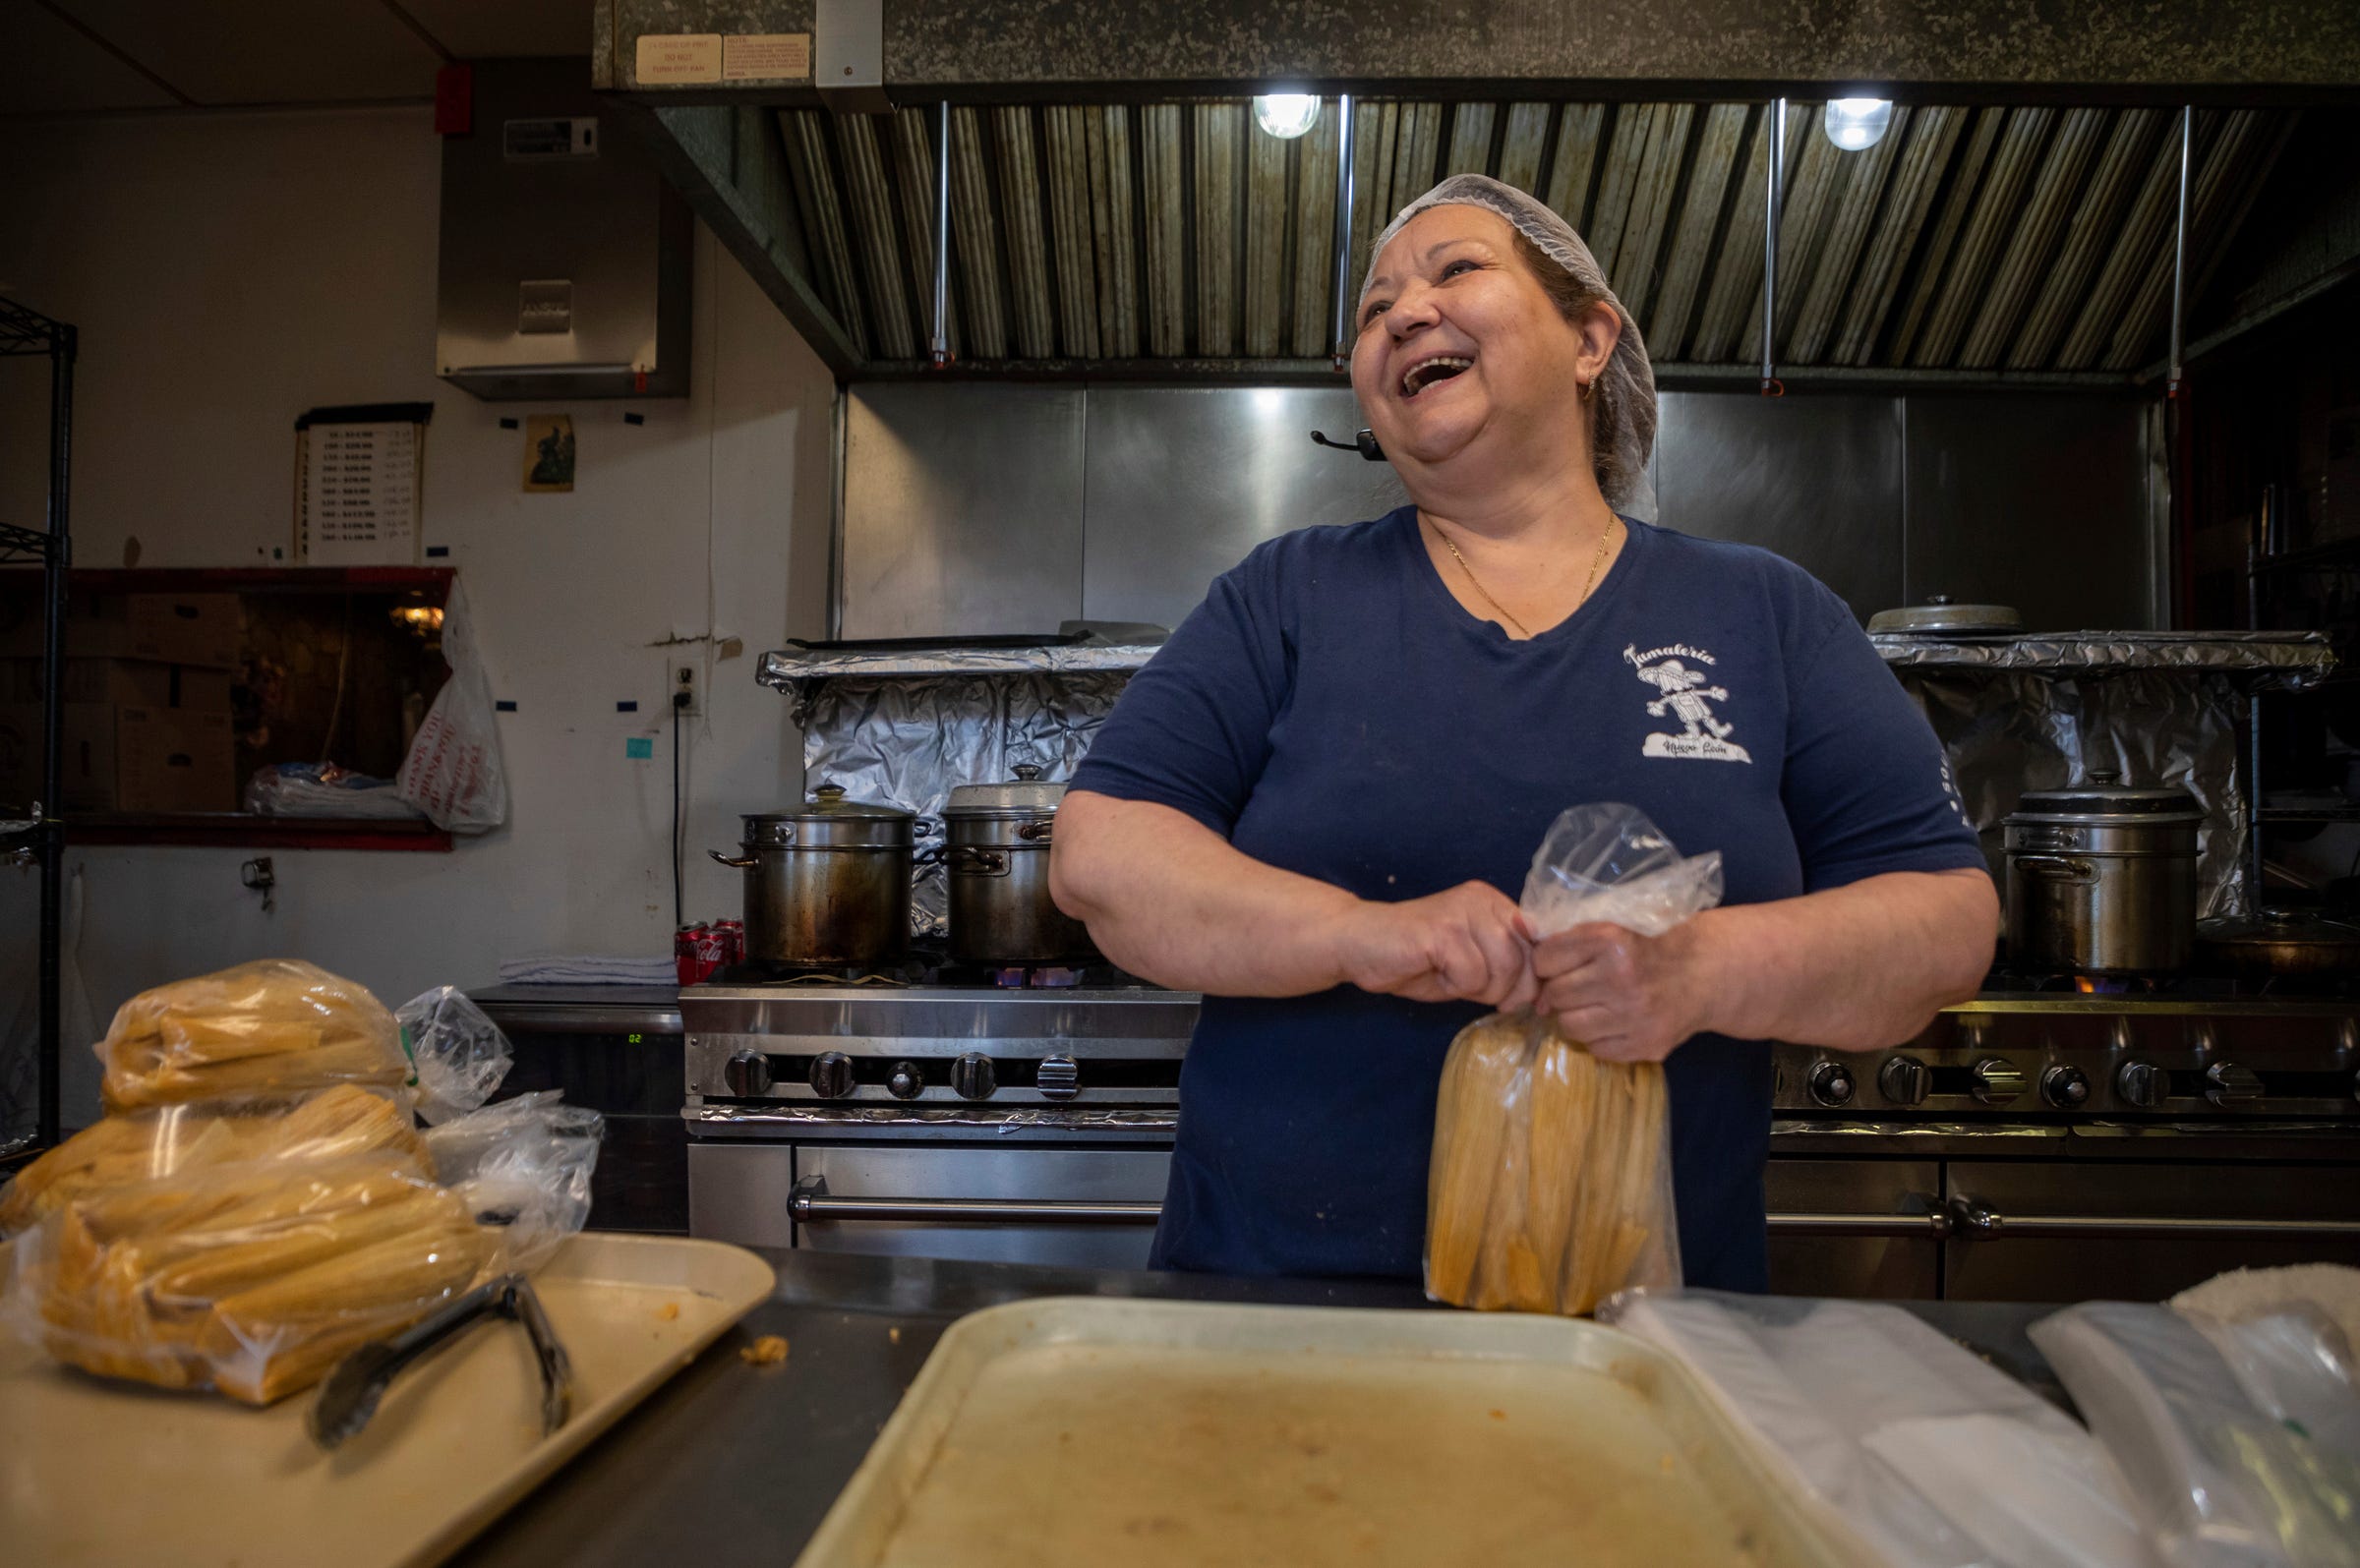 Susana "Suzy" Villarreal-Garza, the owner of Tamaleria Nuevo Leon in Detroit's Mexicantown, laughs as she ties a bag full of tamales inside her business in southwest Detroit on Thursday, March 2, 2023. 